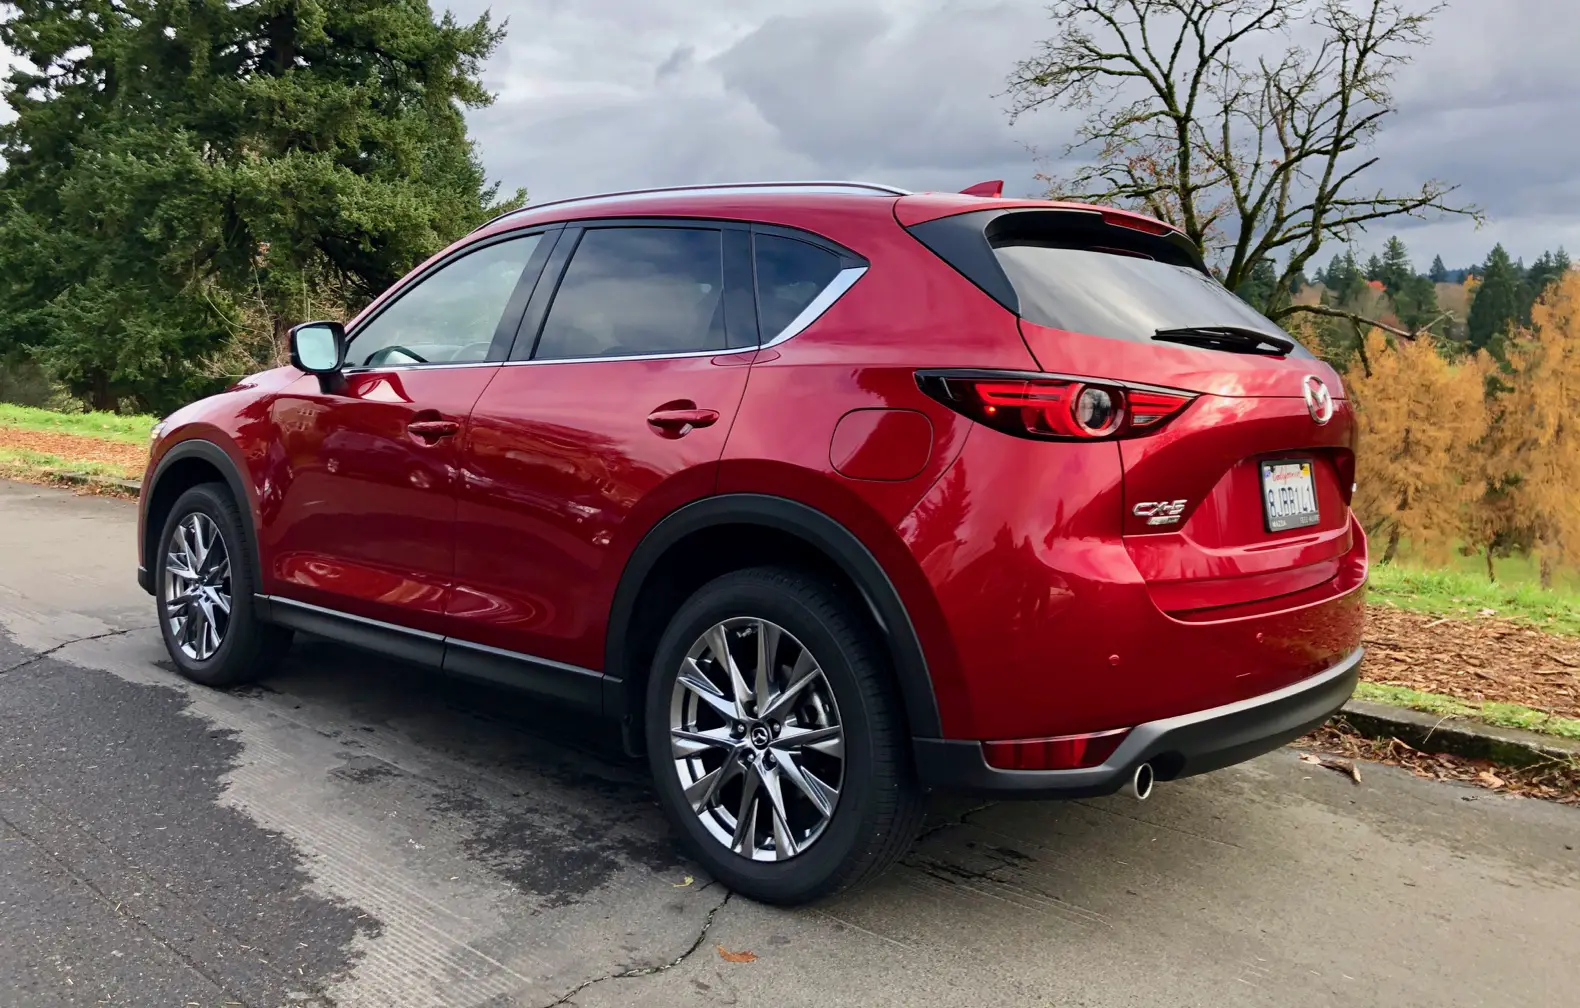 2019 Mazda CX-5 Signature Review: Practical and Pretty | The Torque Report